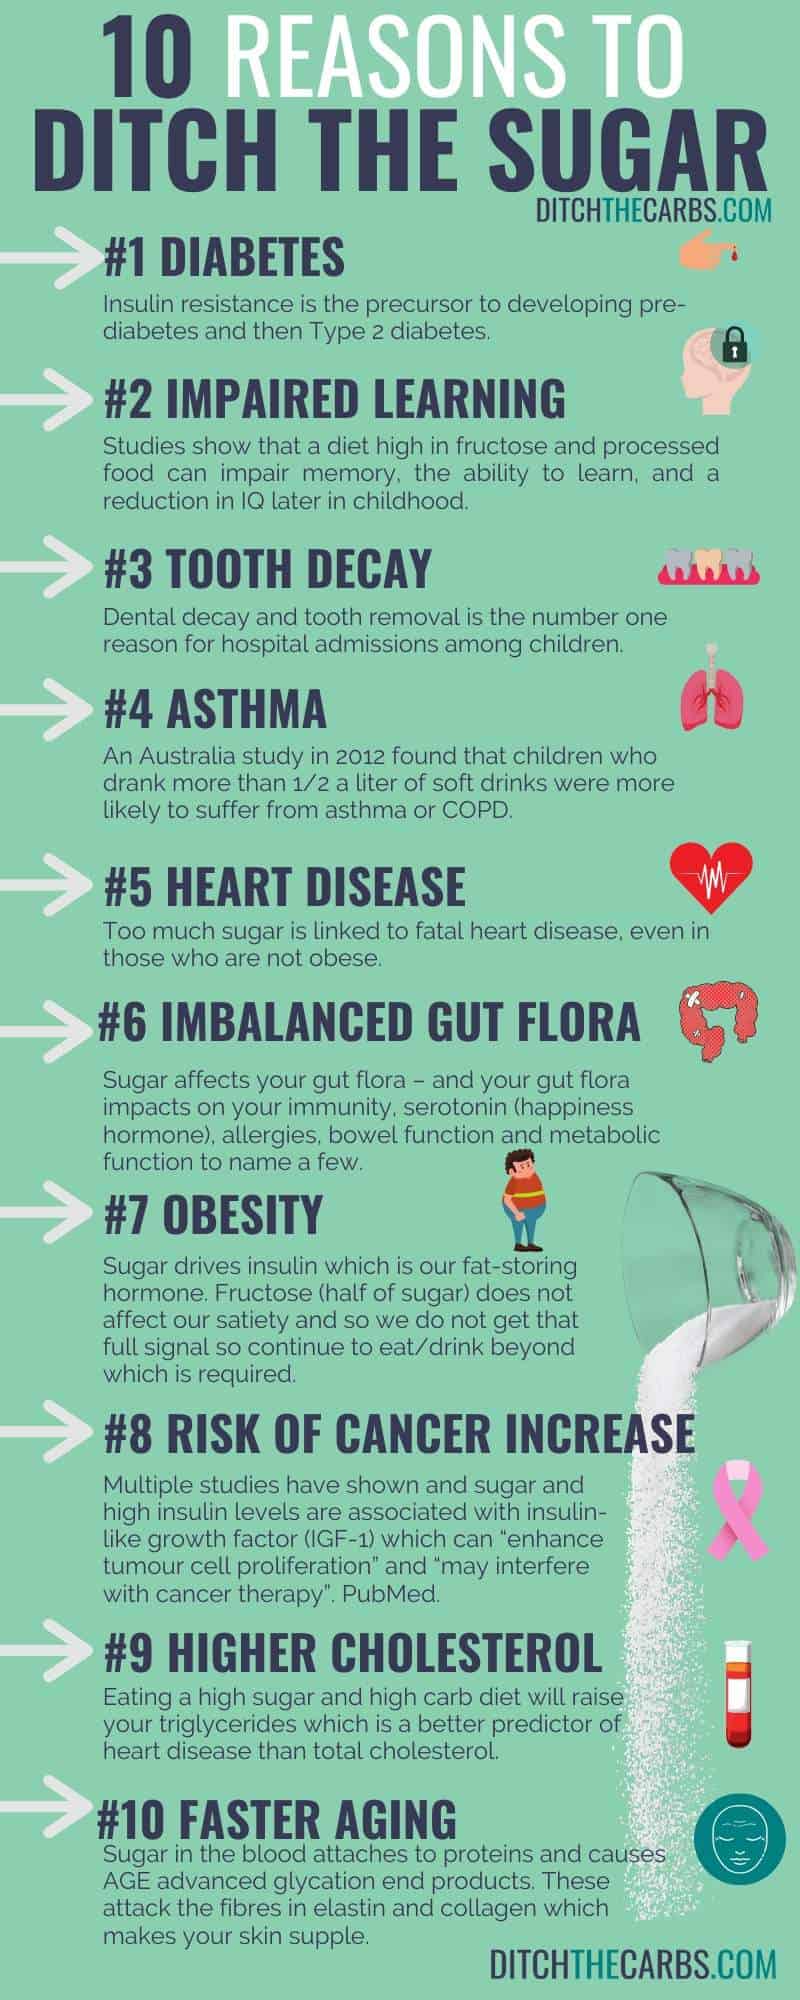 list of 10 reasons why sugar is bad for us infographic for grain-free granola bars